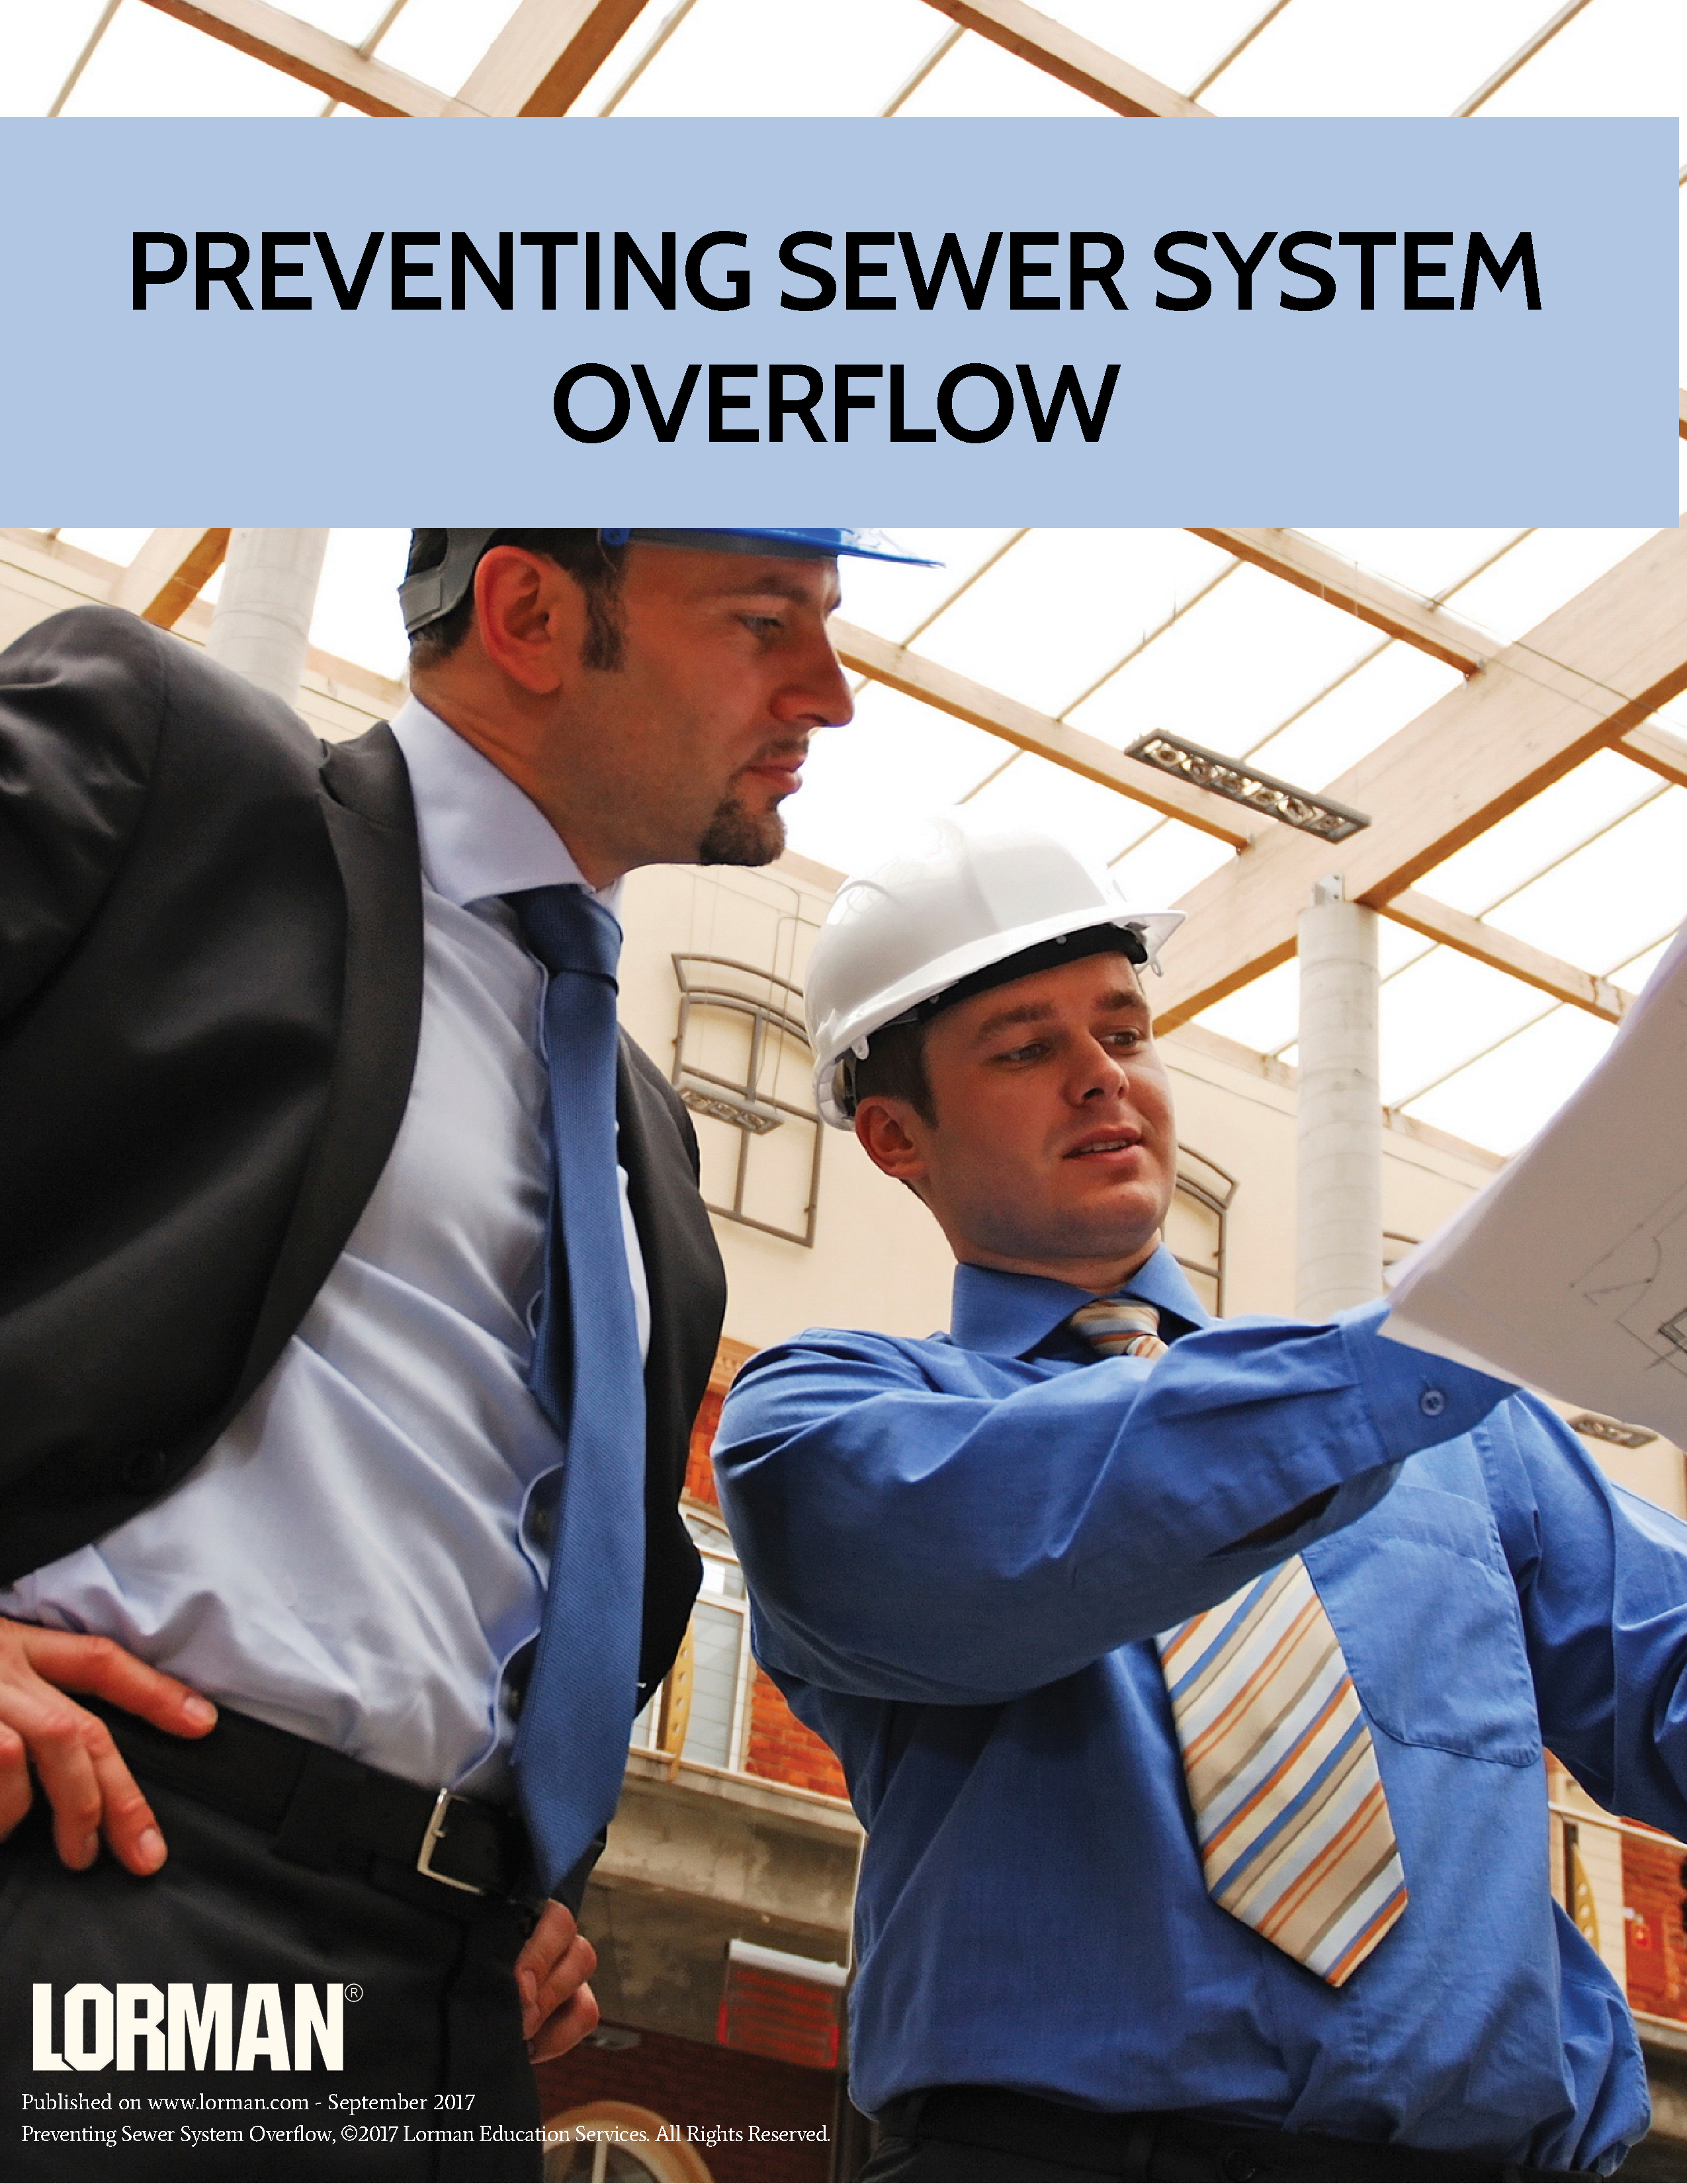 Preventing Sewer System Overflow